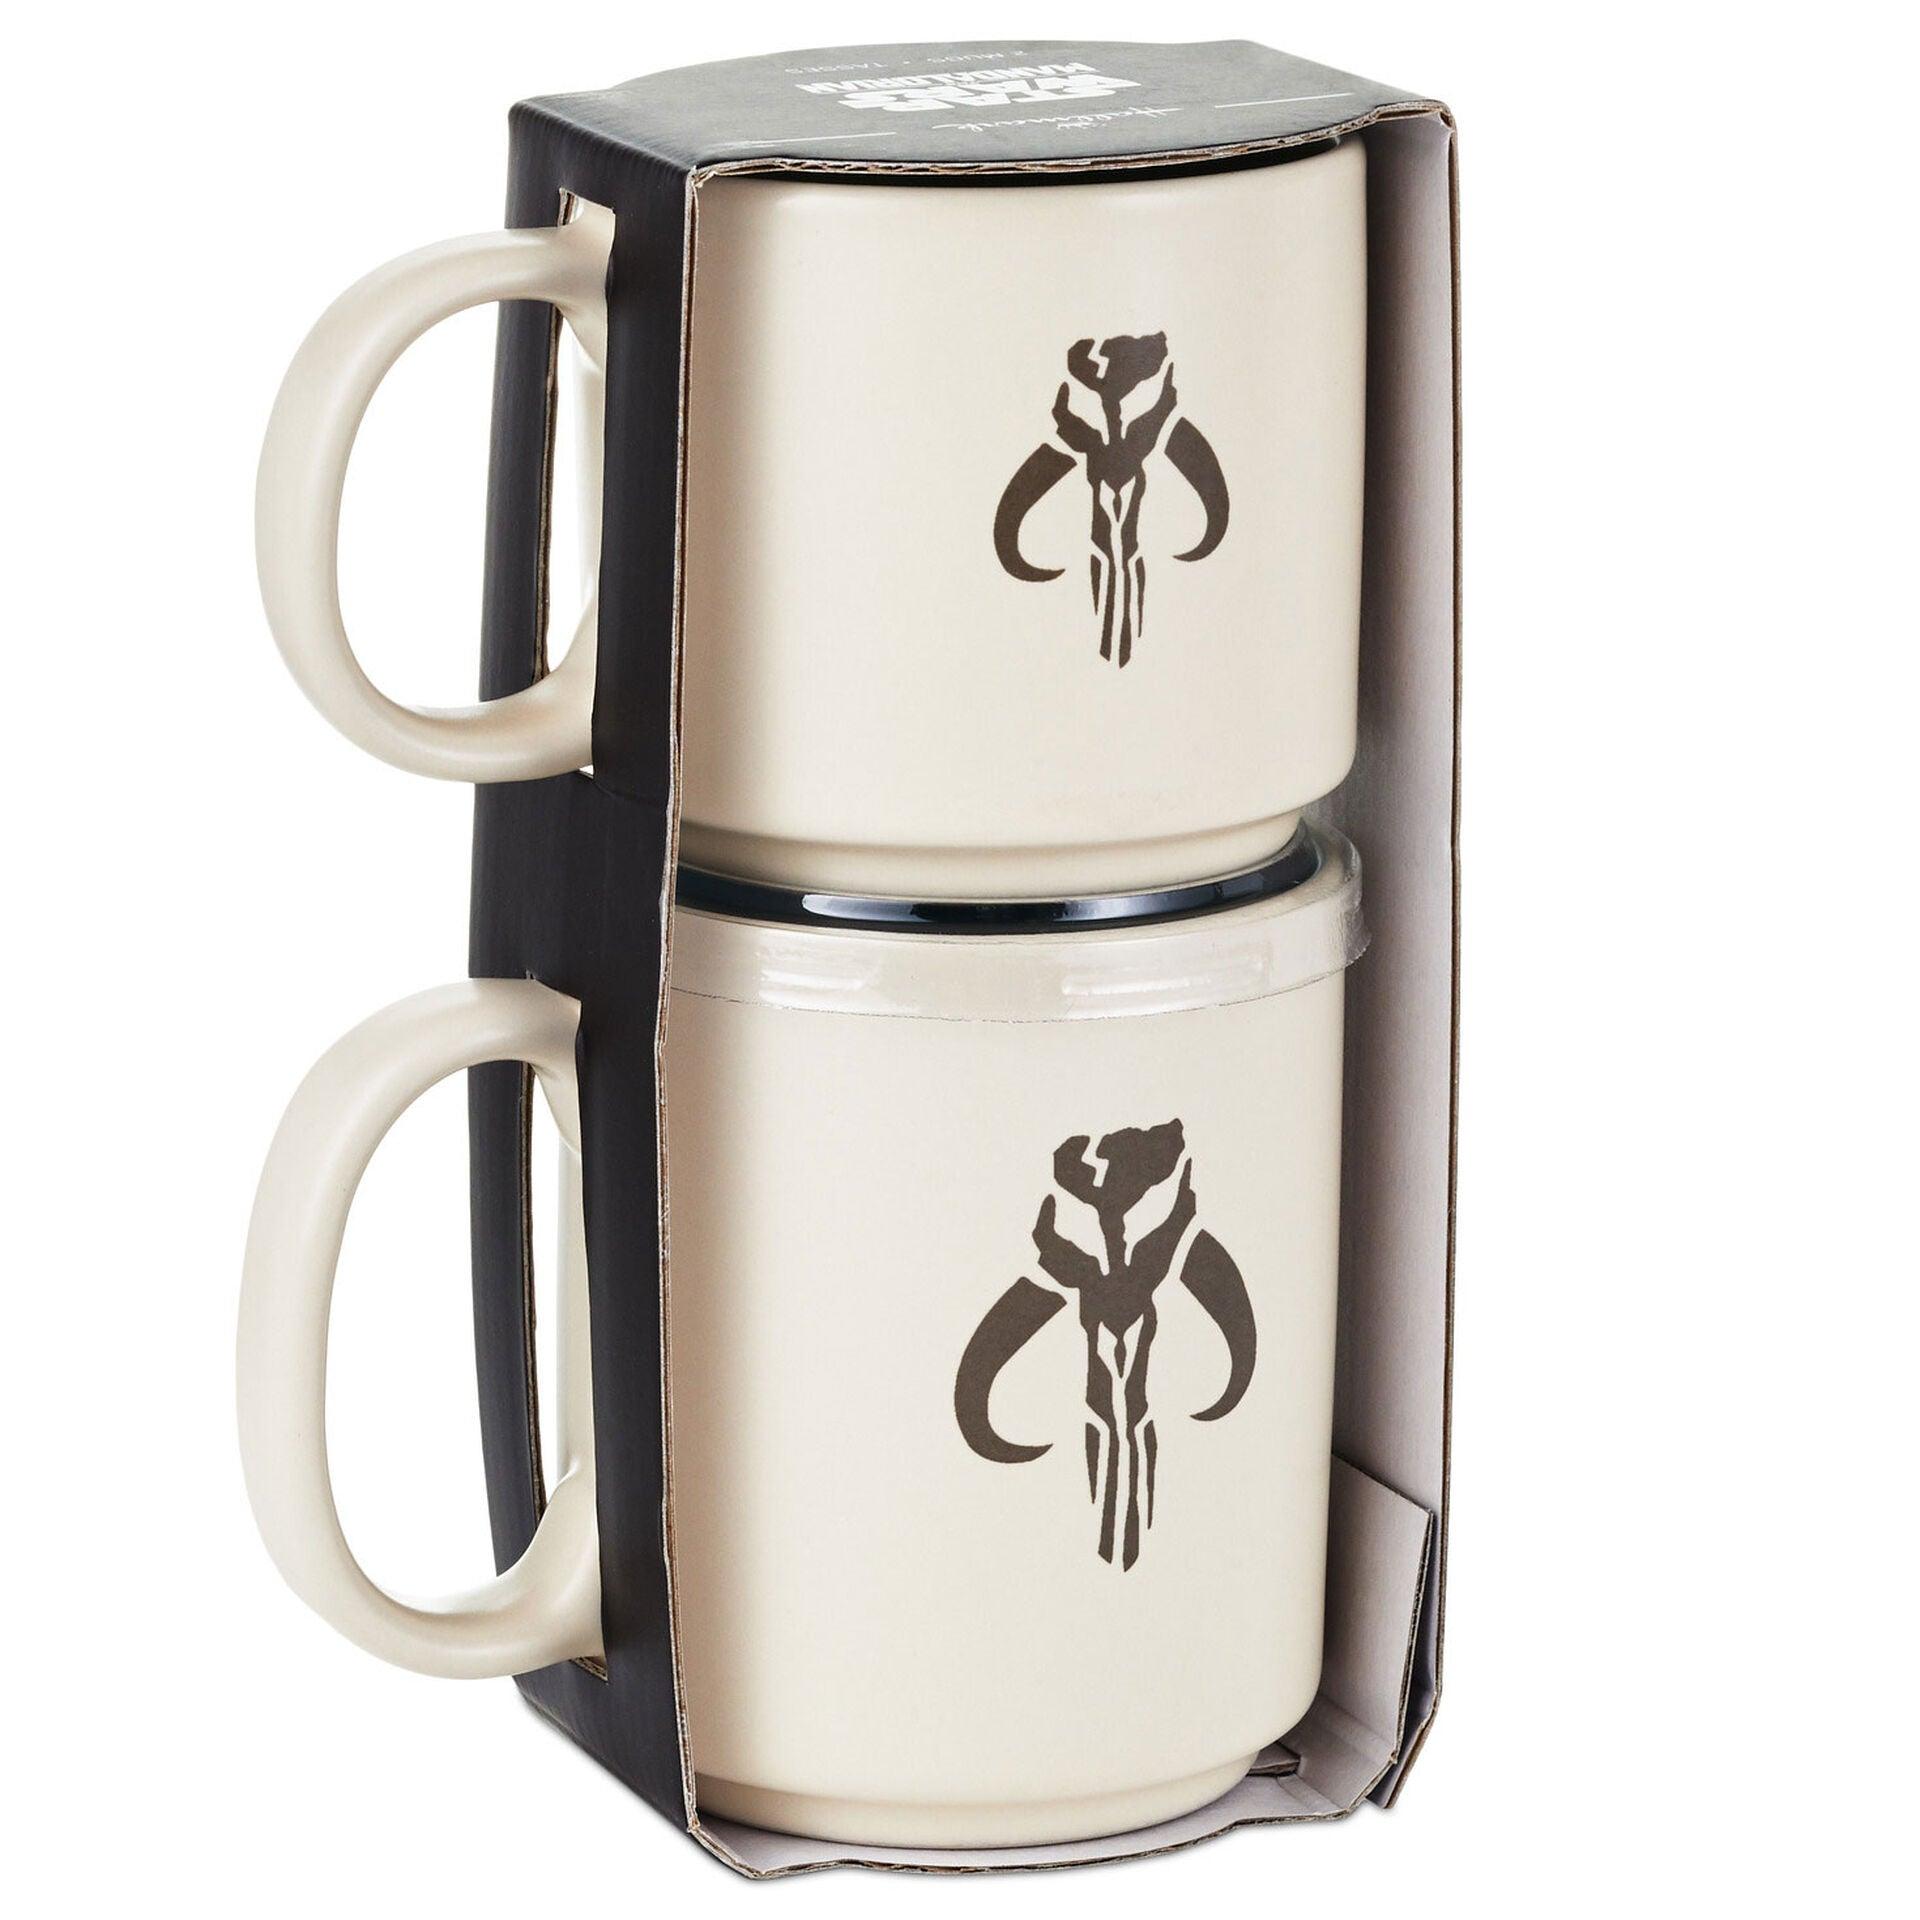 Star Wars: The Mandalorian™ and Grogu™ Adult and Child Stacking Mugs, Set of 2